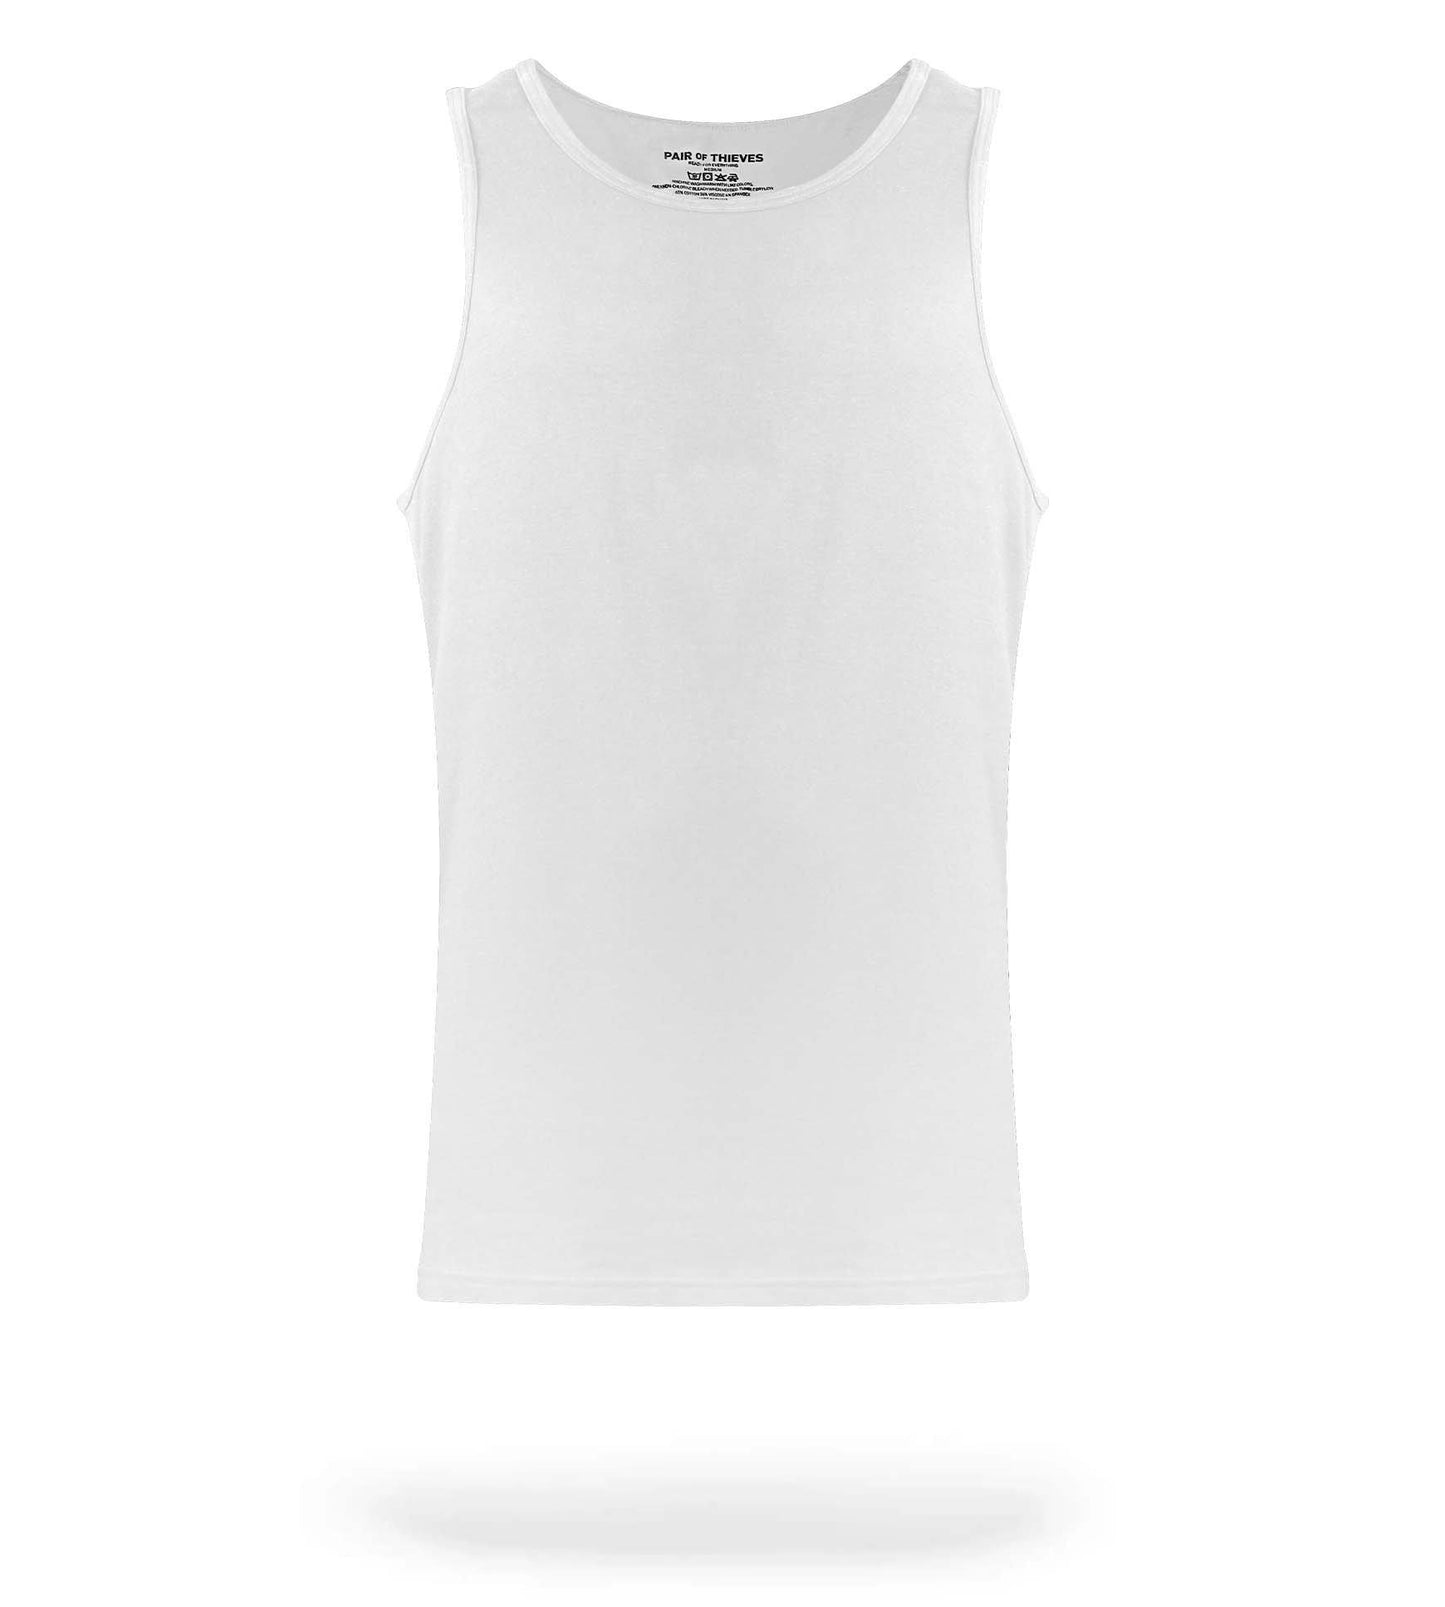 The Solid White Mega Soft Tank product image